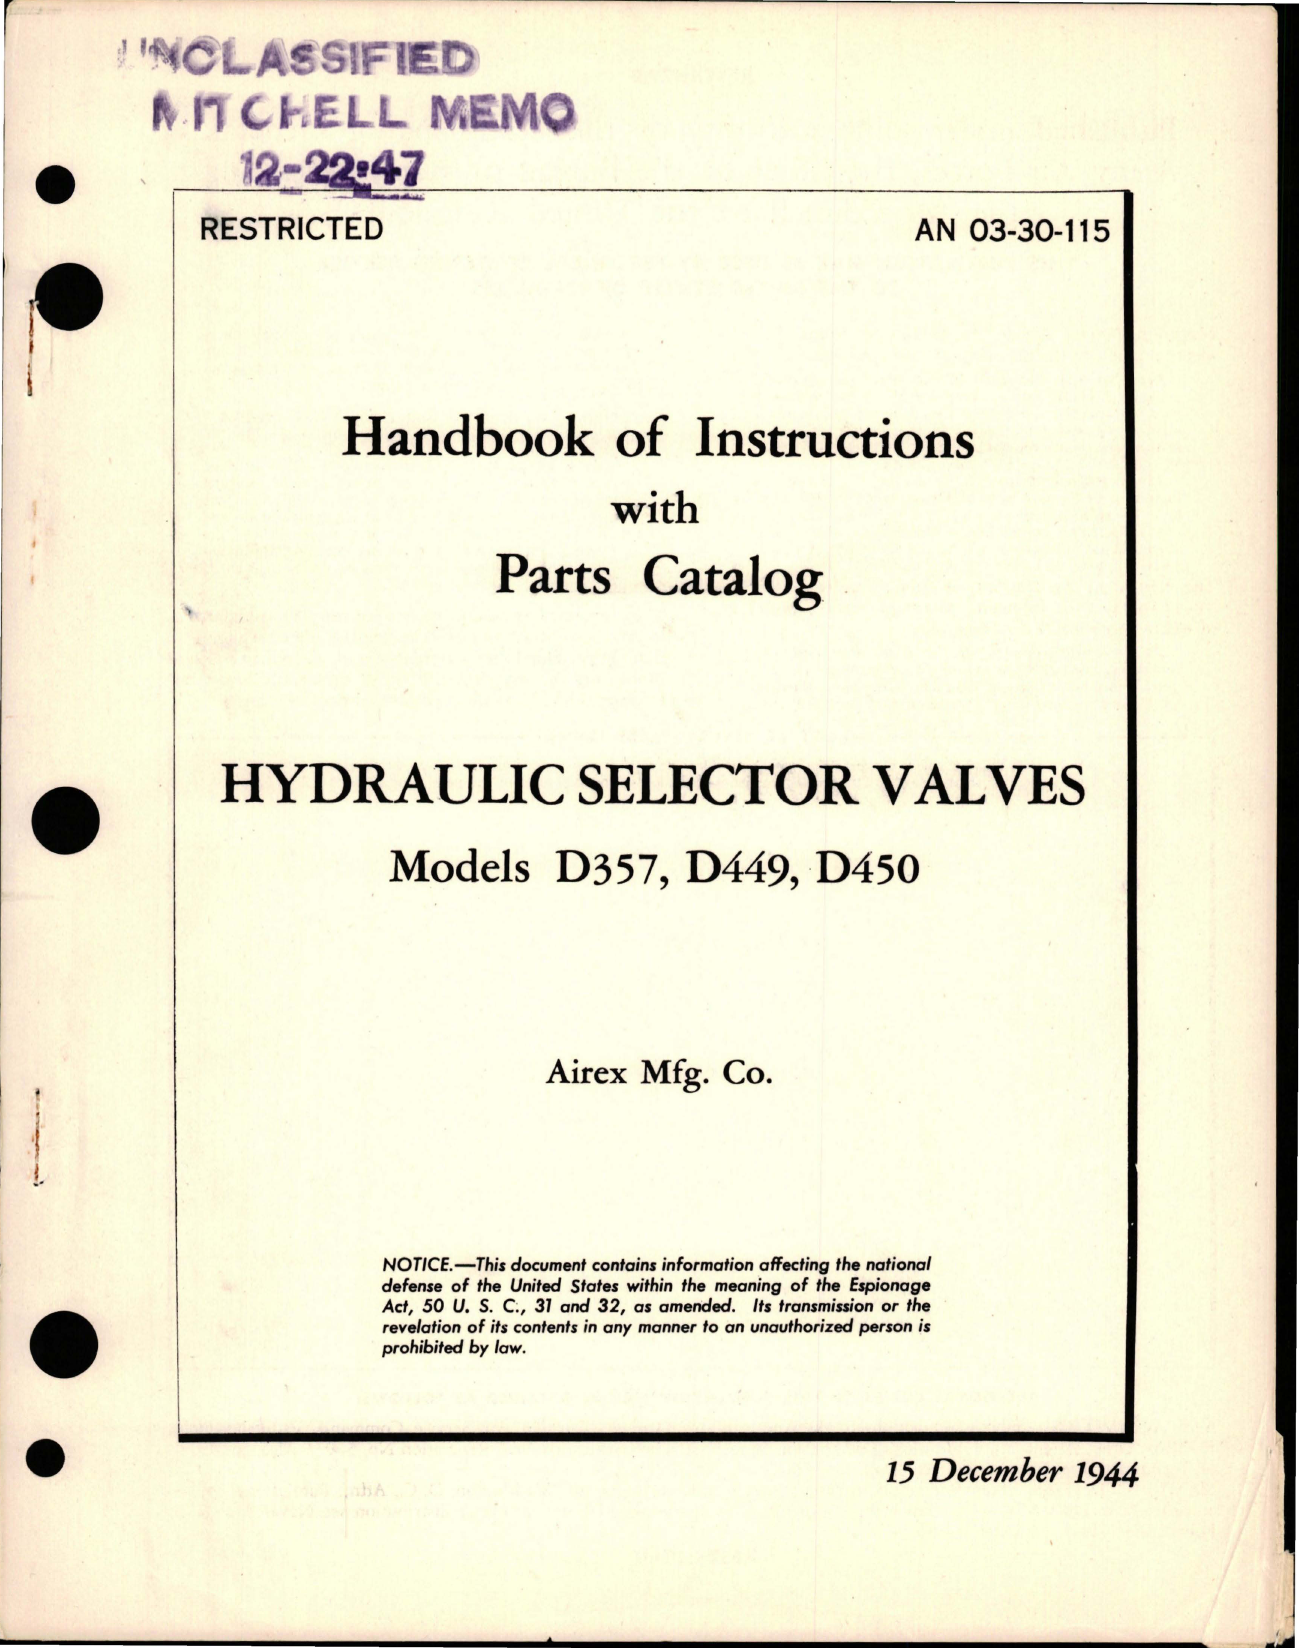 Sample page 1 from AirCorps Library document: Instructions with Parts Catalog for Hydraulic Selector Valves - Models D357, D449, and D450